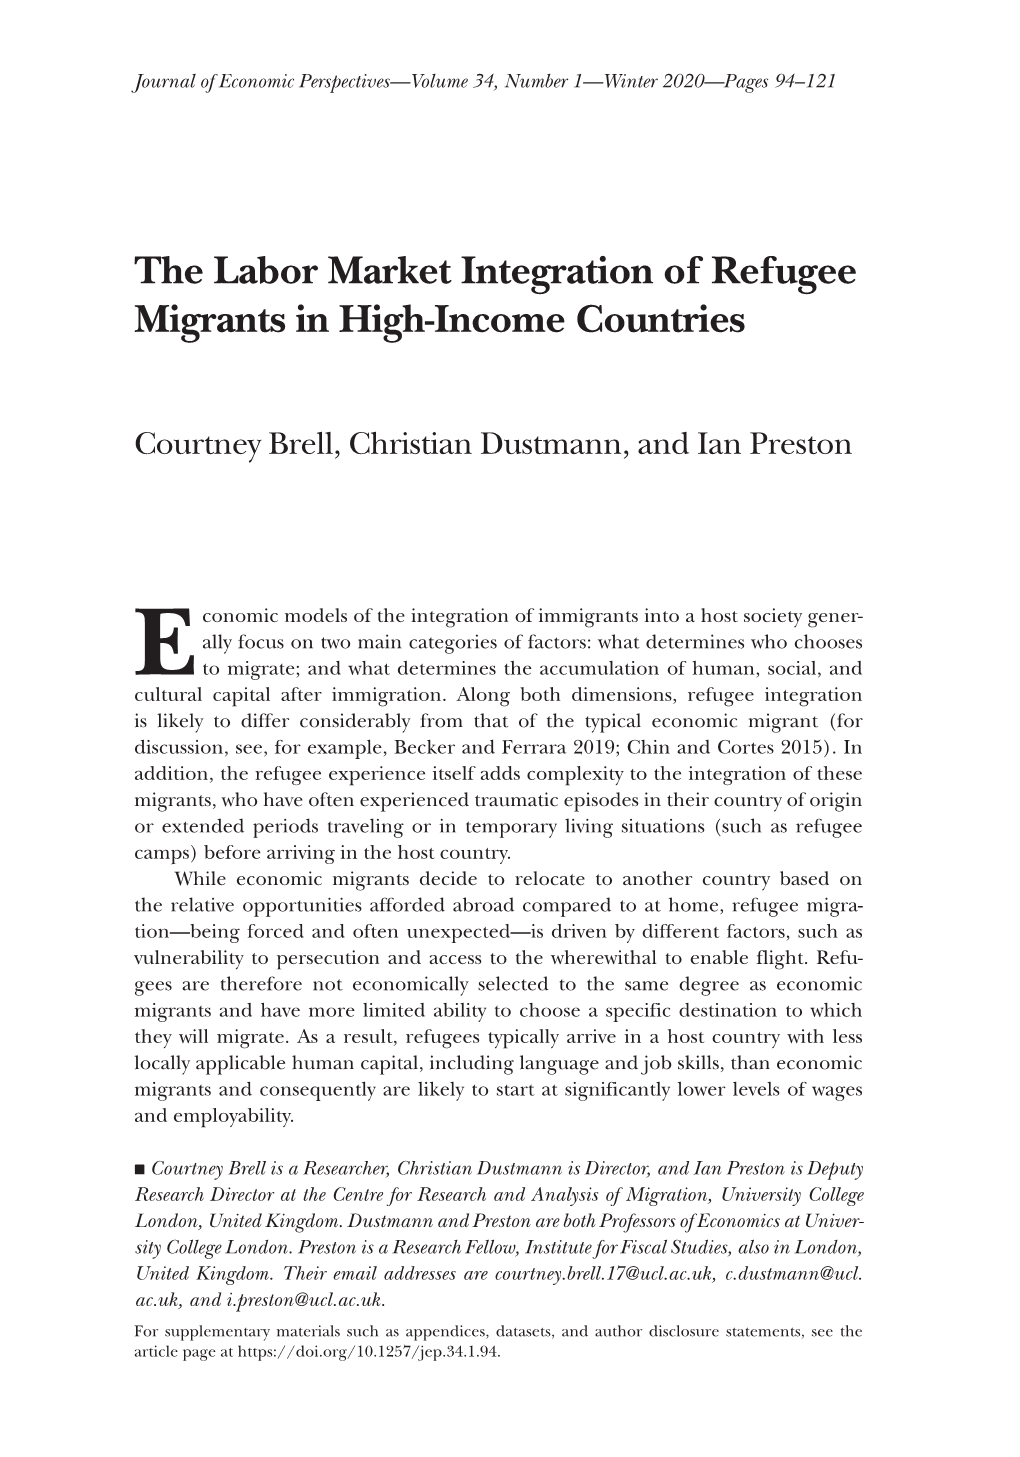 The Labor Market Integration of Refugee Migrants in High-Income Countries